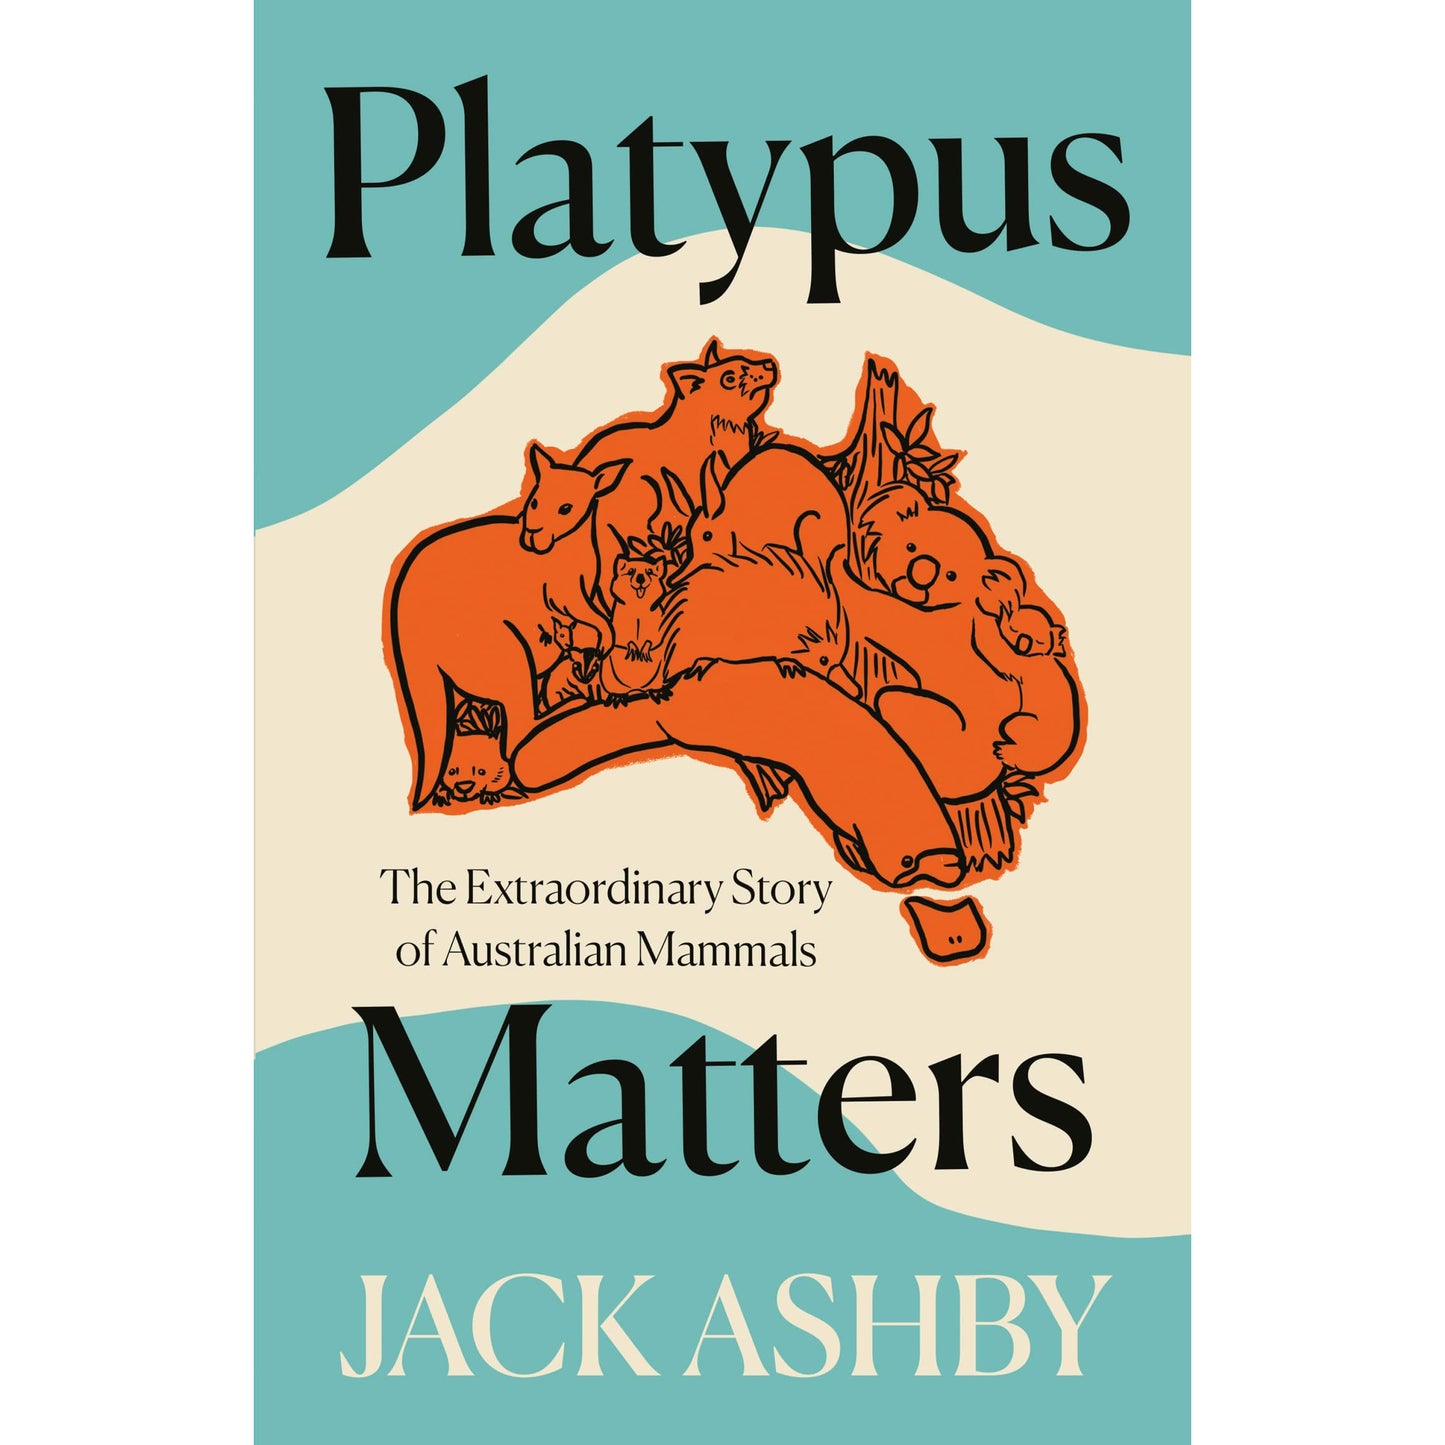 Platypus Matters by Jack Ashby